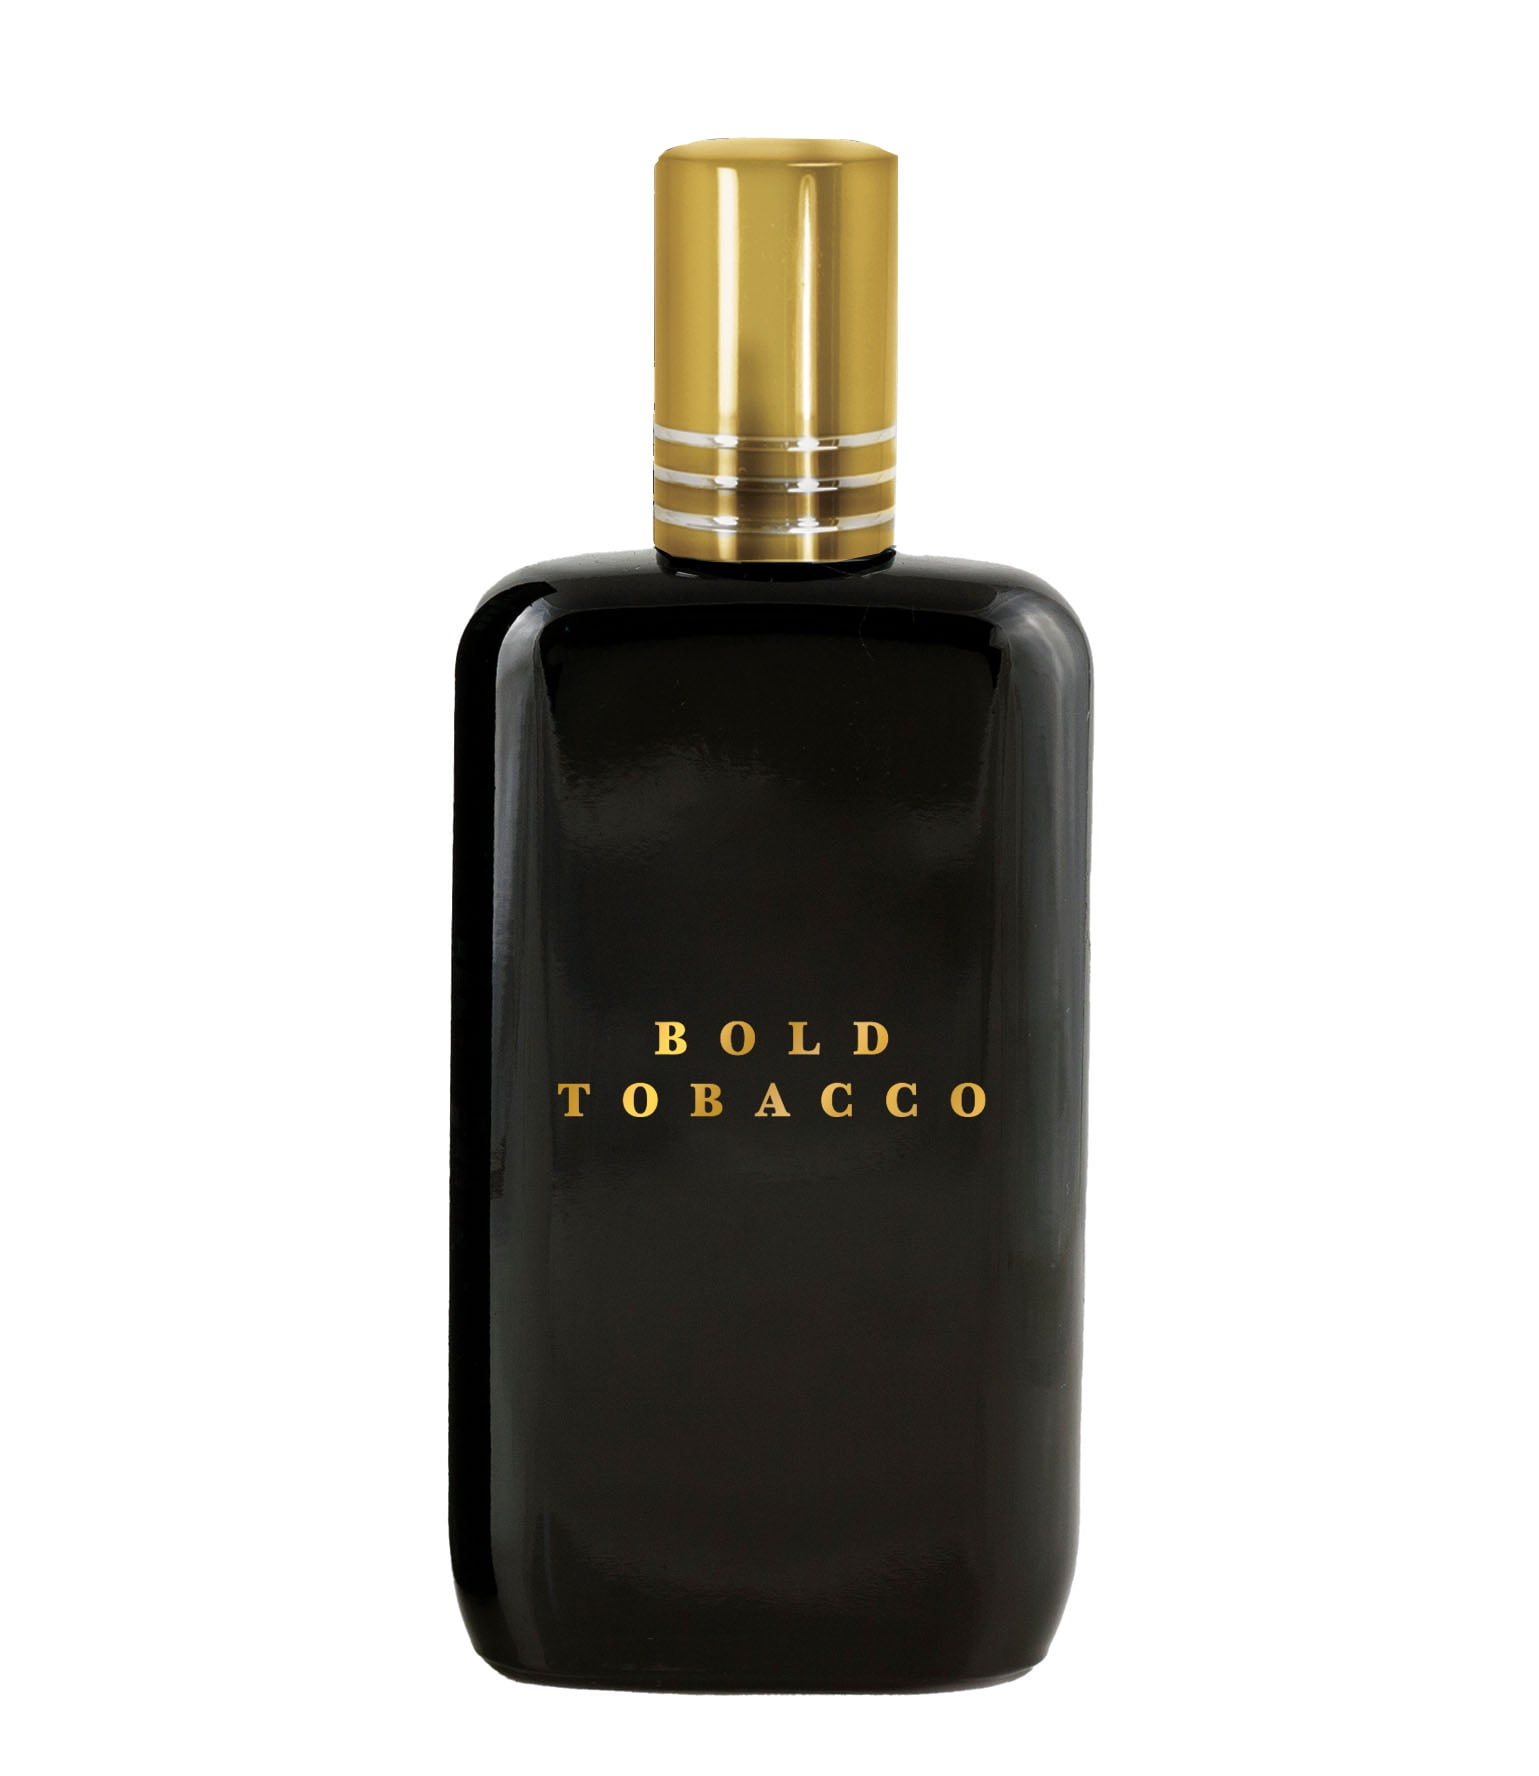  Warm Tobacco Pipe - 1/2 oz Roll-On Fragrance Cologne, Pure  Uncut Body Oil, Made in USA by Beard of God : Health & Household